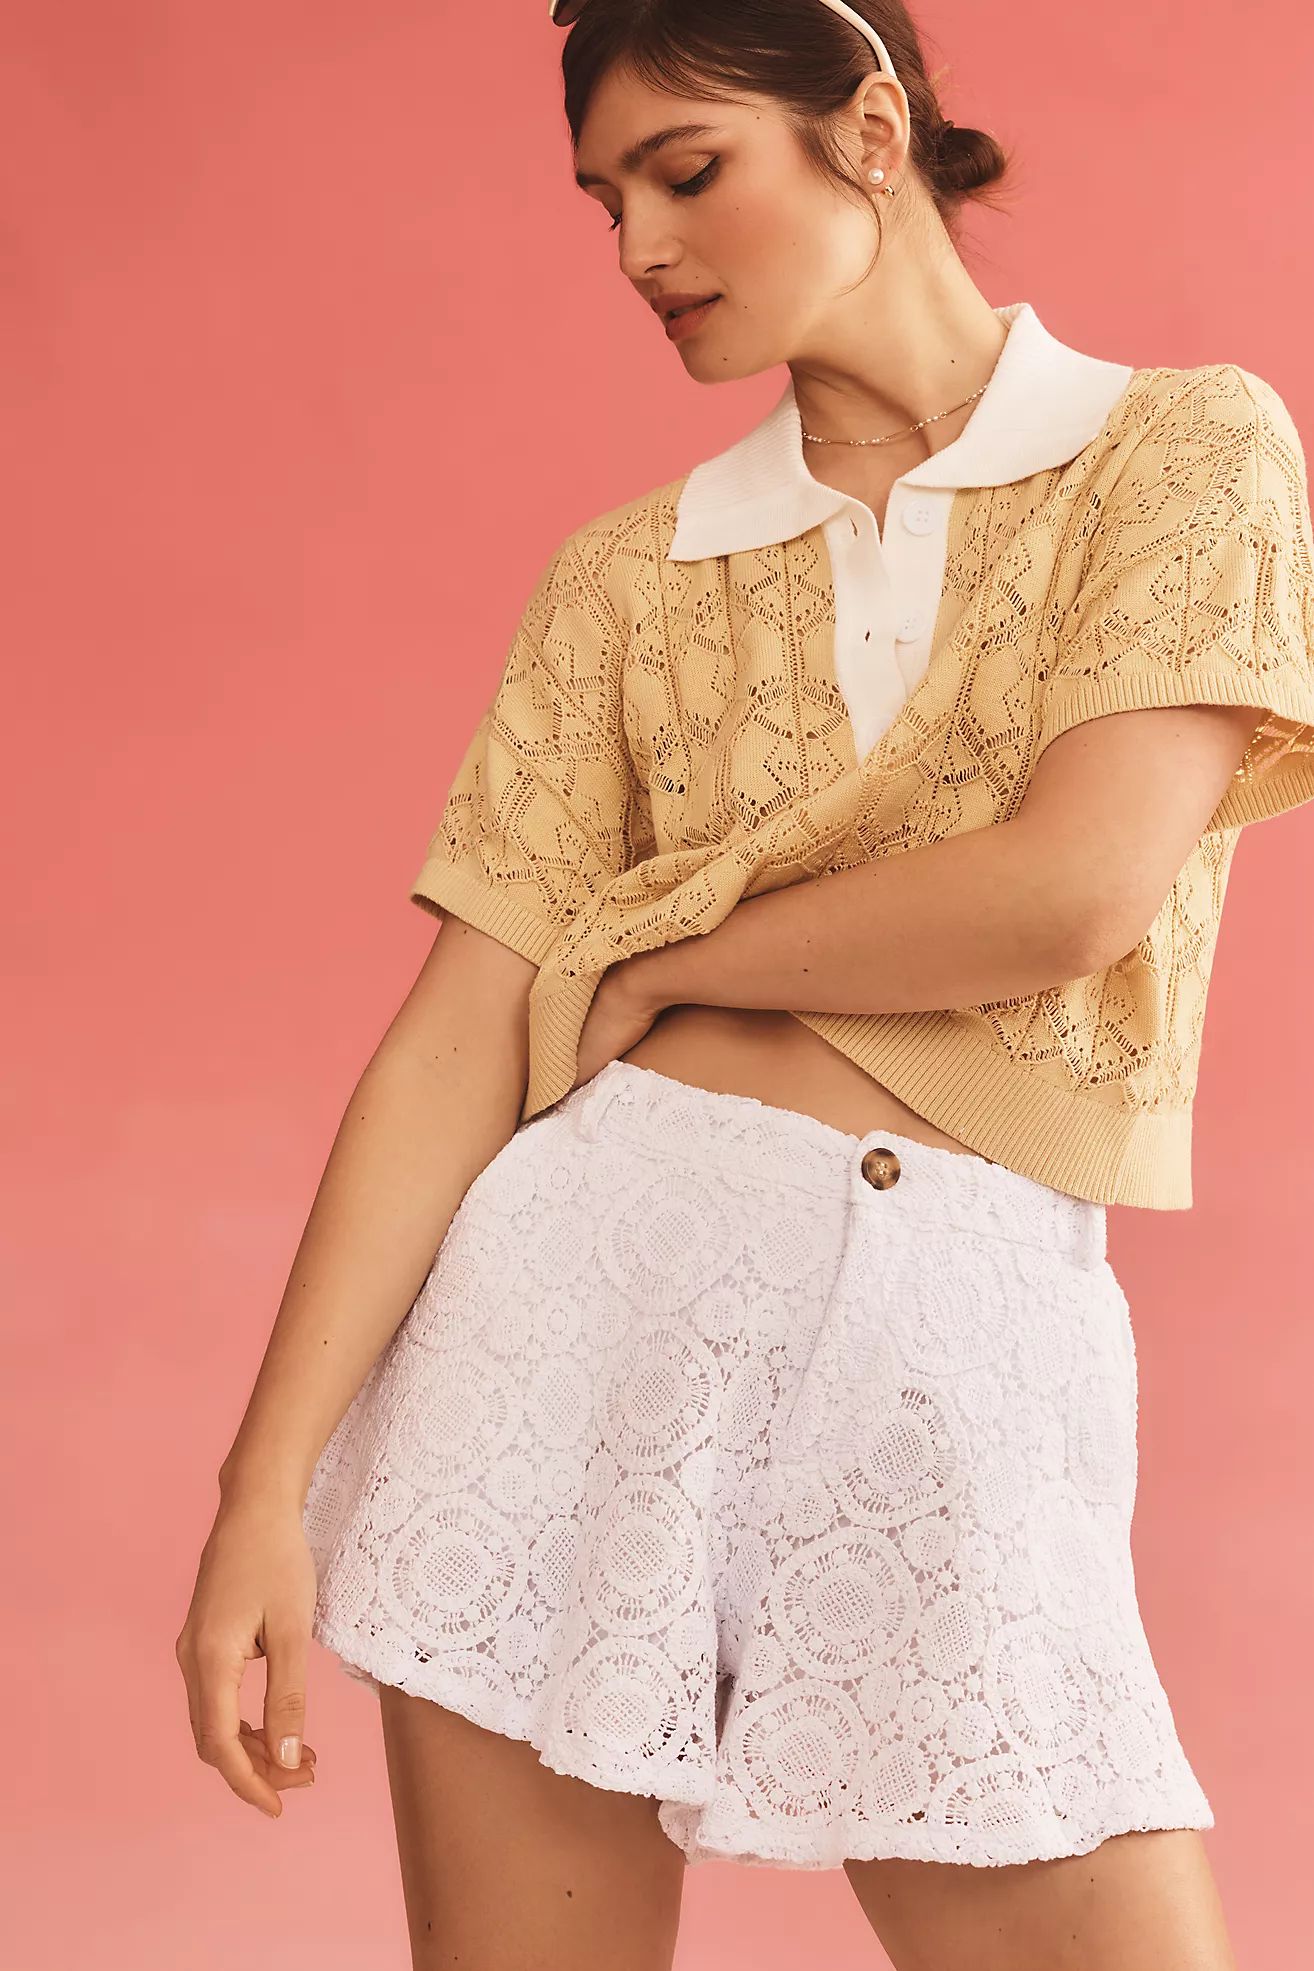 By Anthropologie Skirty Shorts | Anthropologie (US)